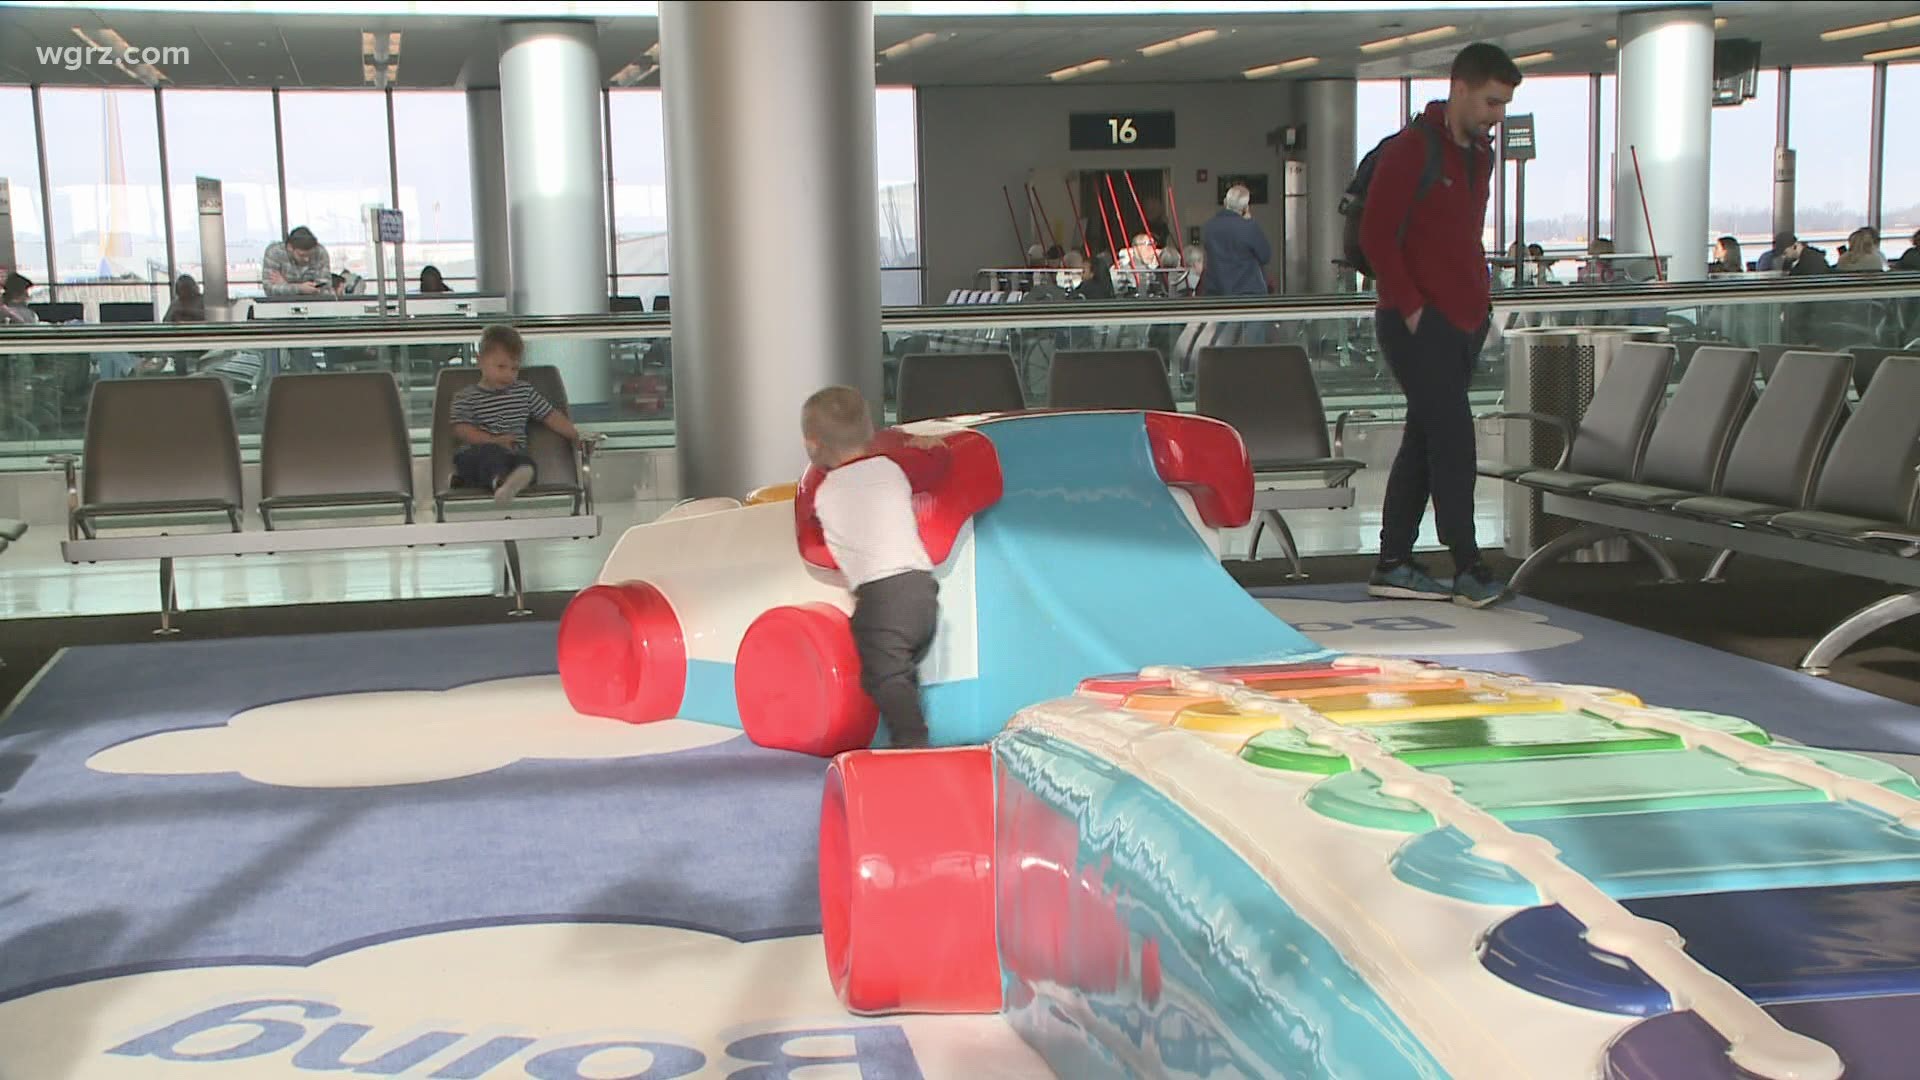 Fisher Price Play gates reopen at Buffalo airport